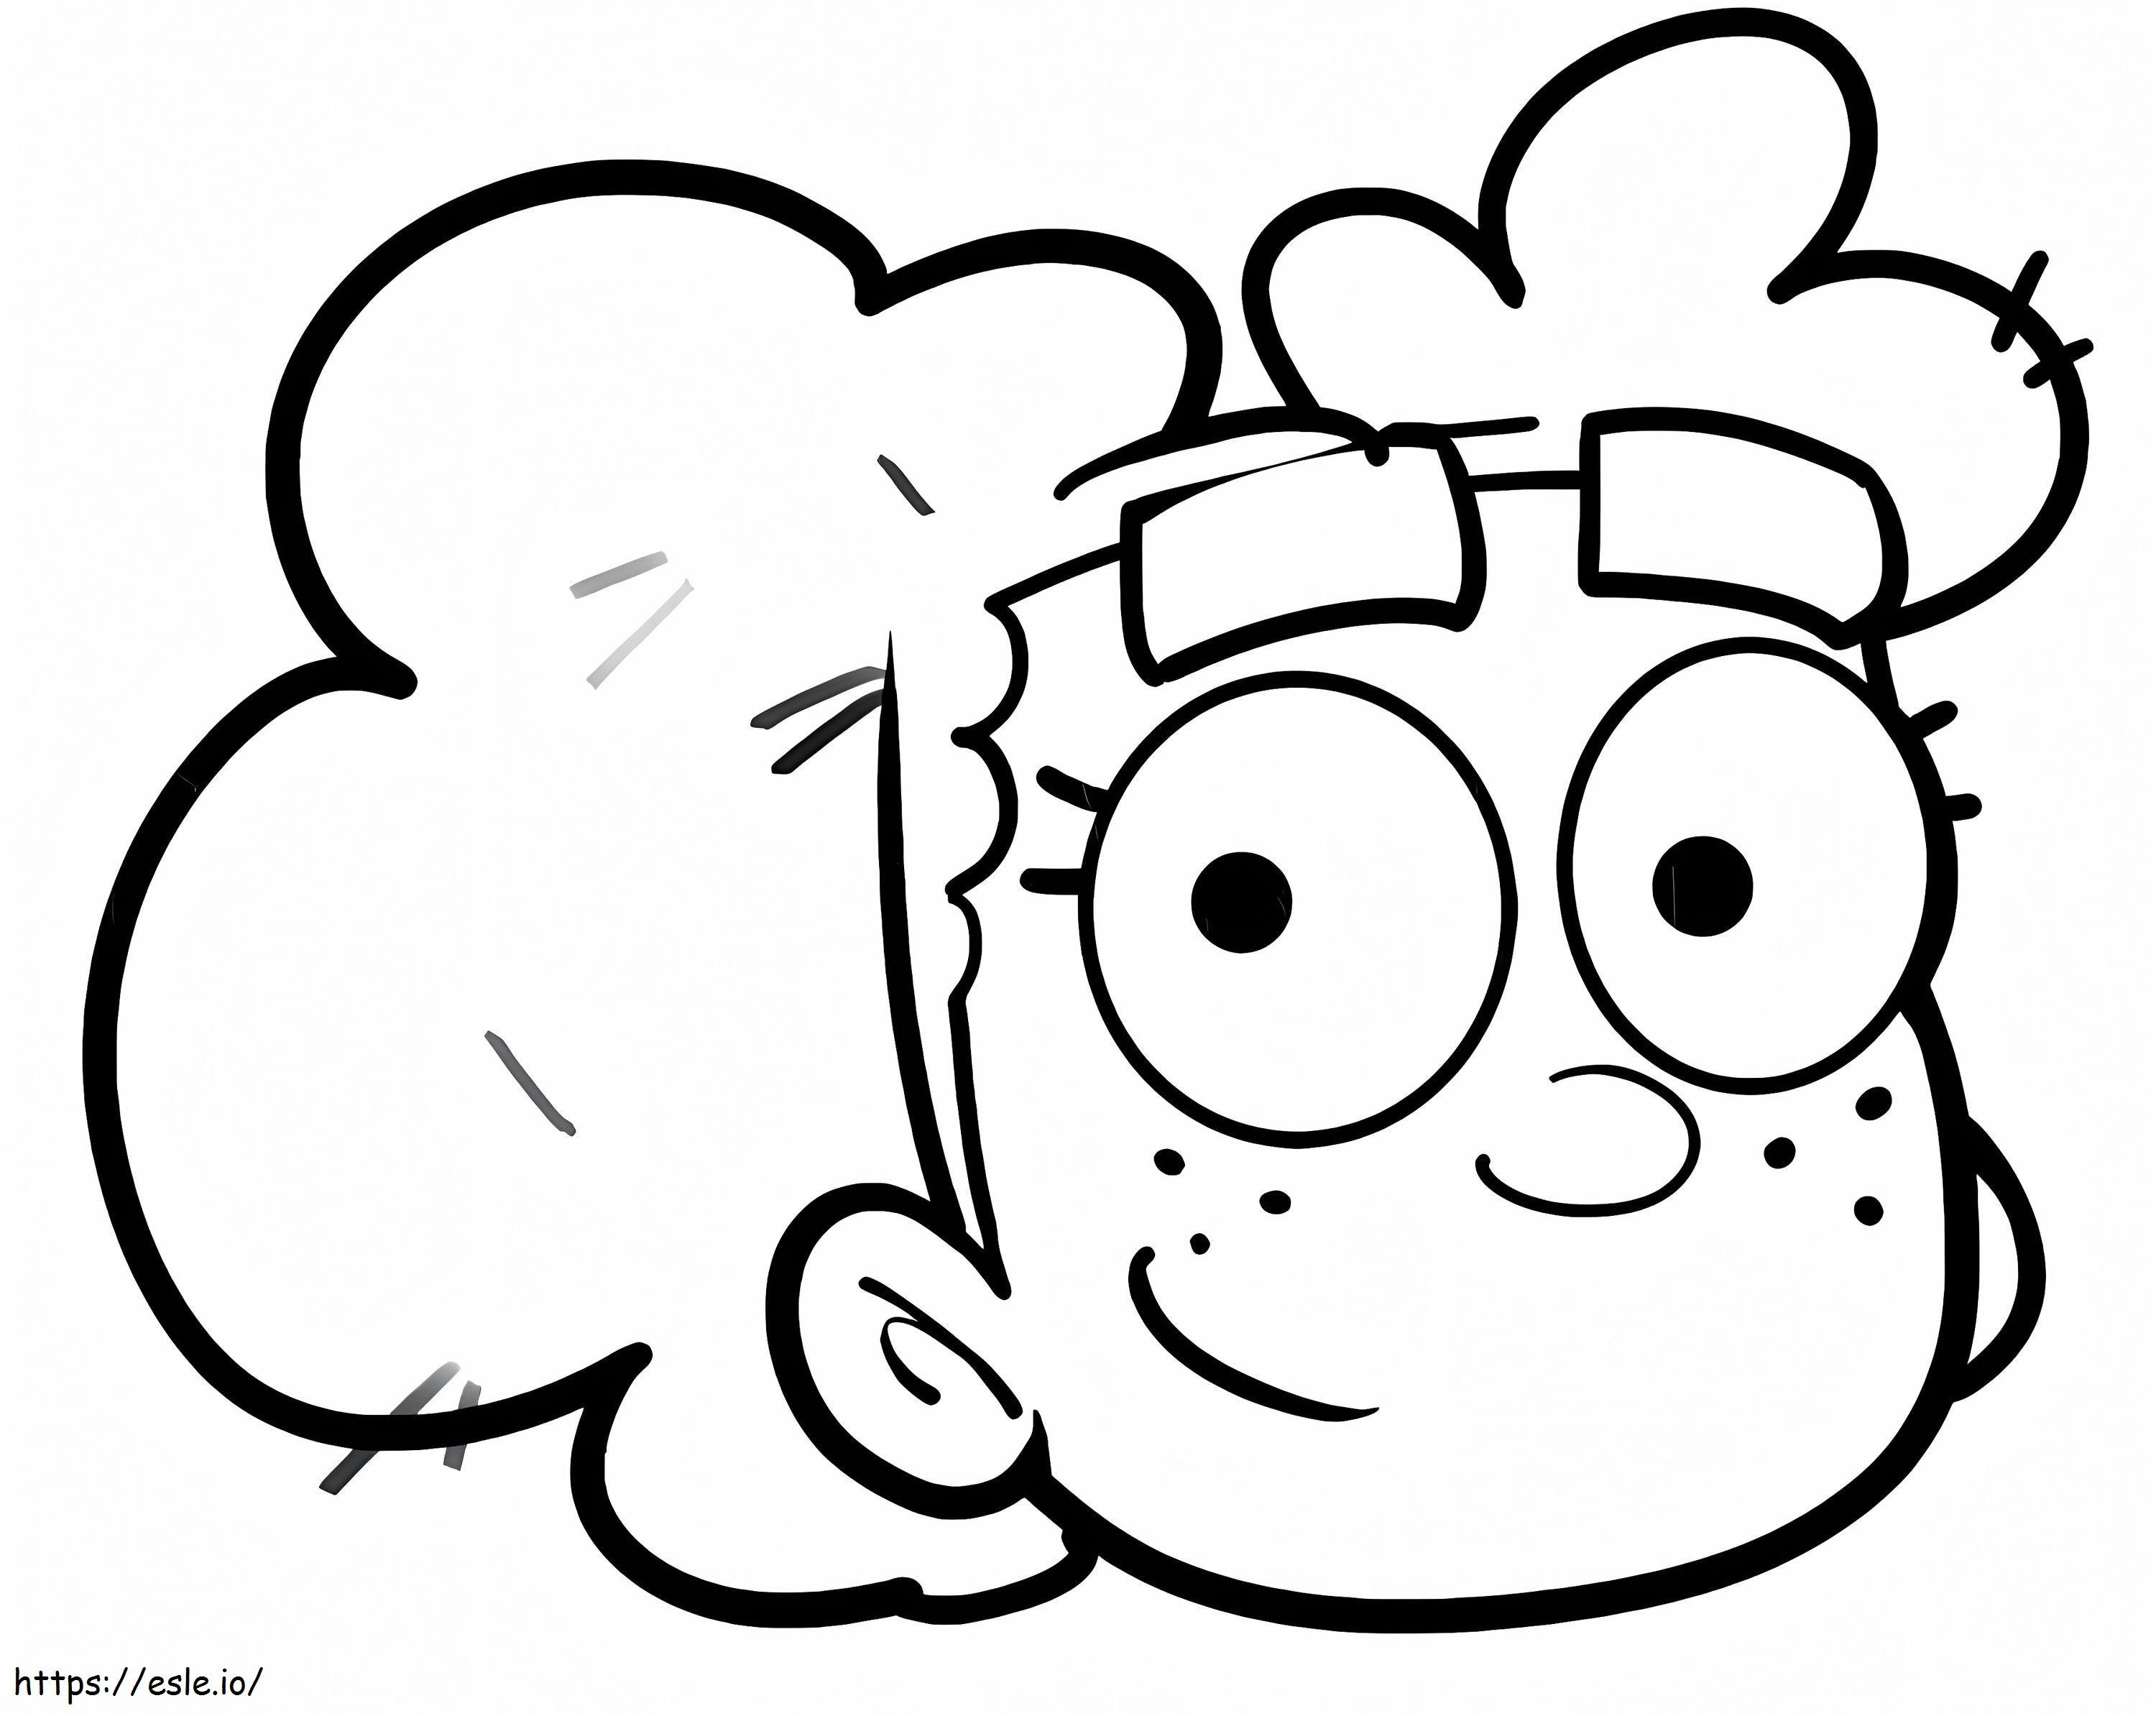 Annie Bramley Face coloring page